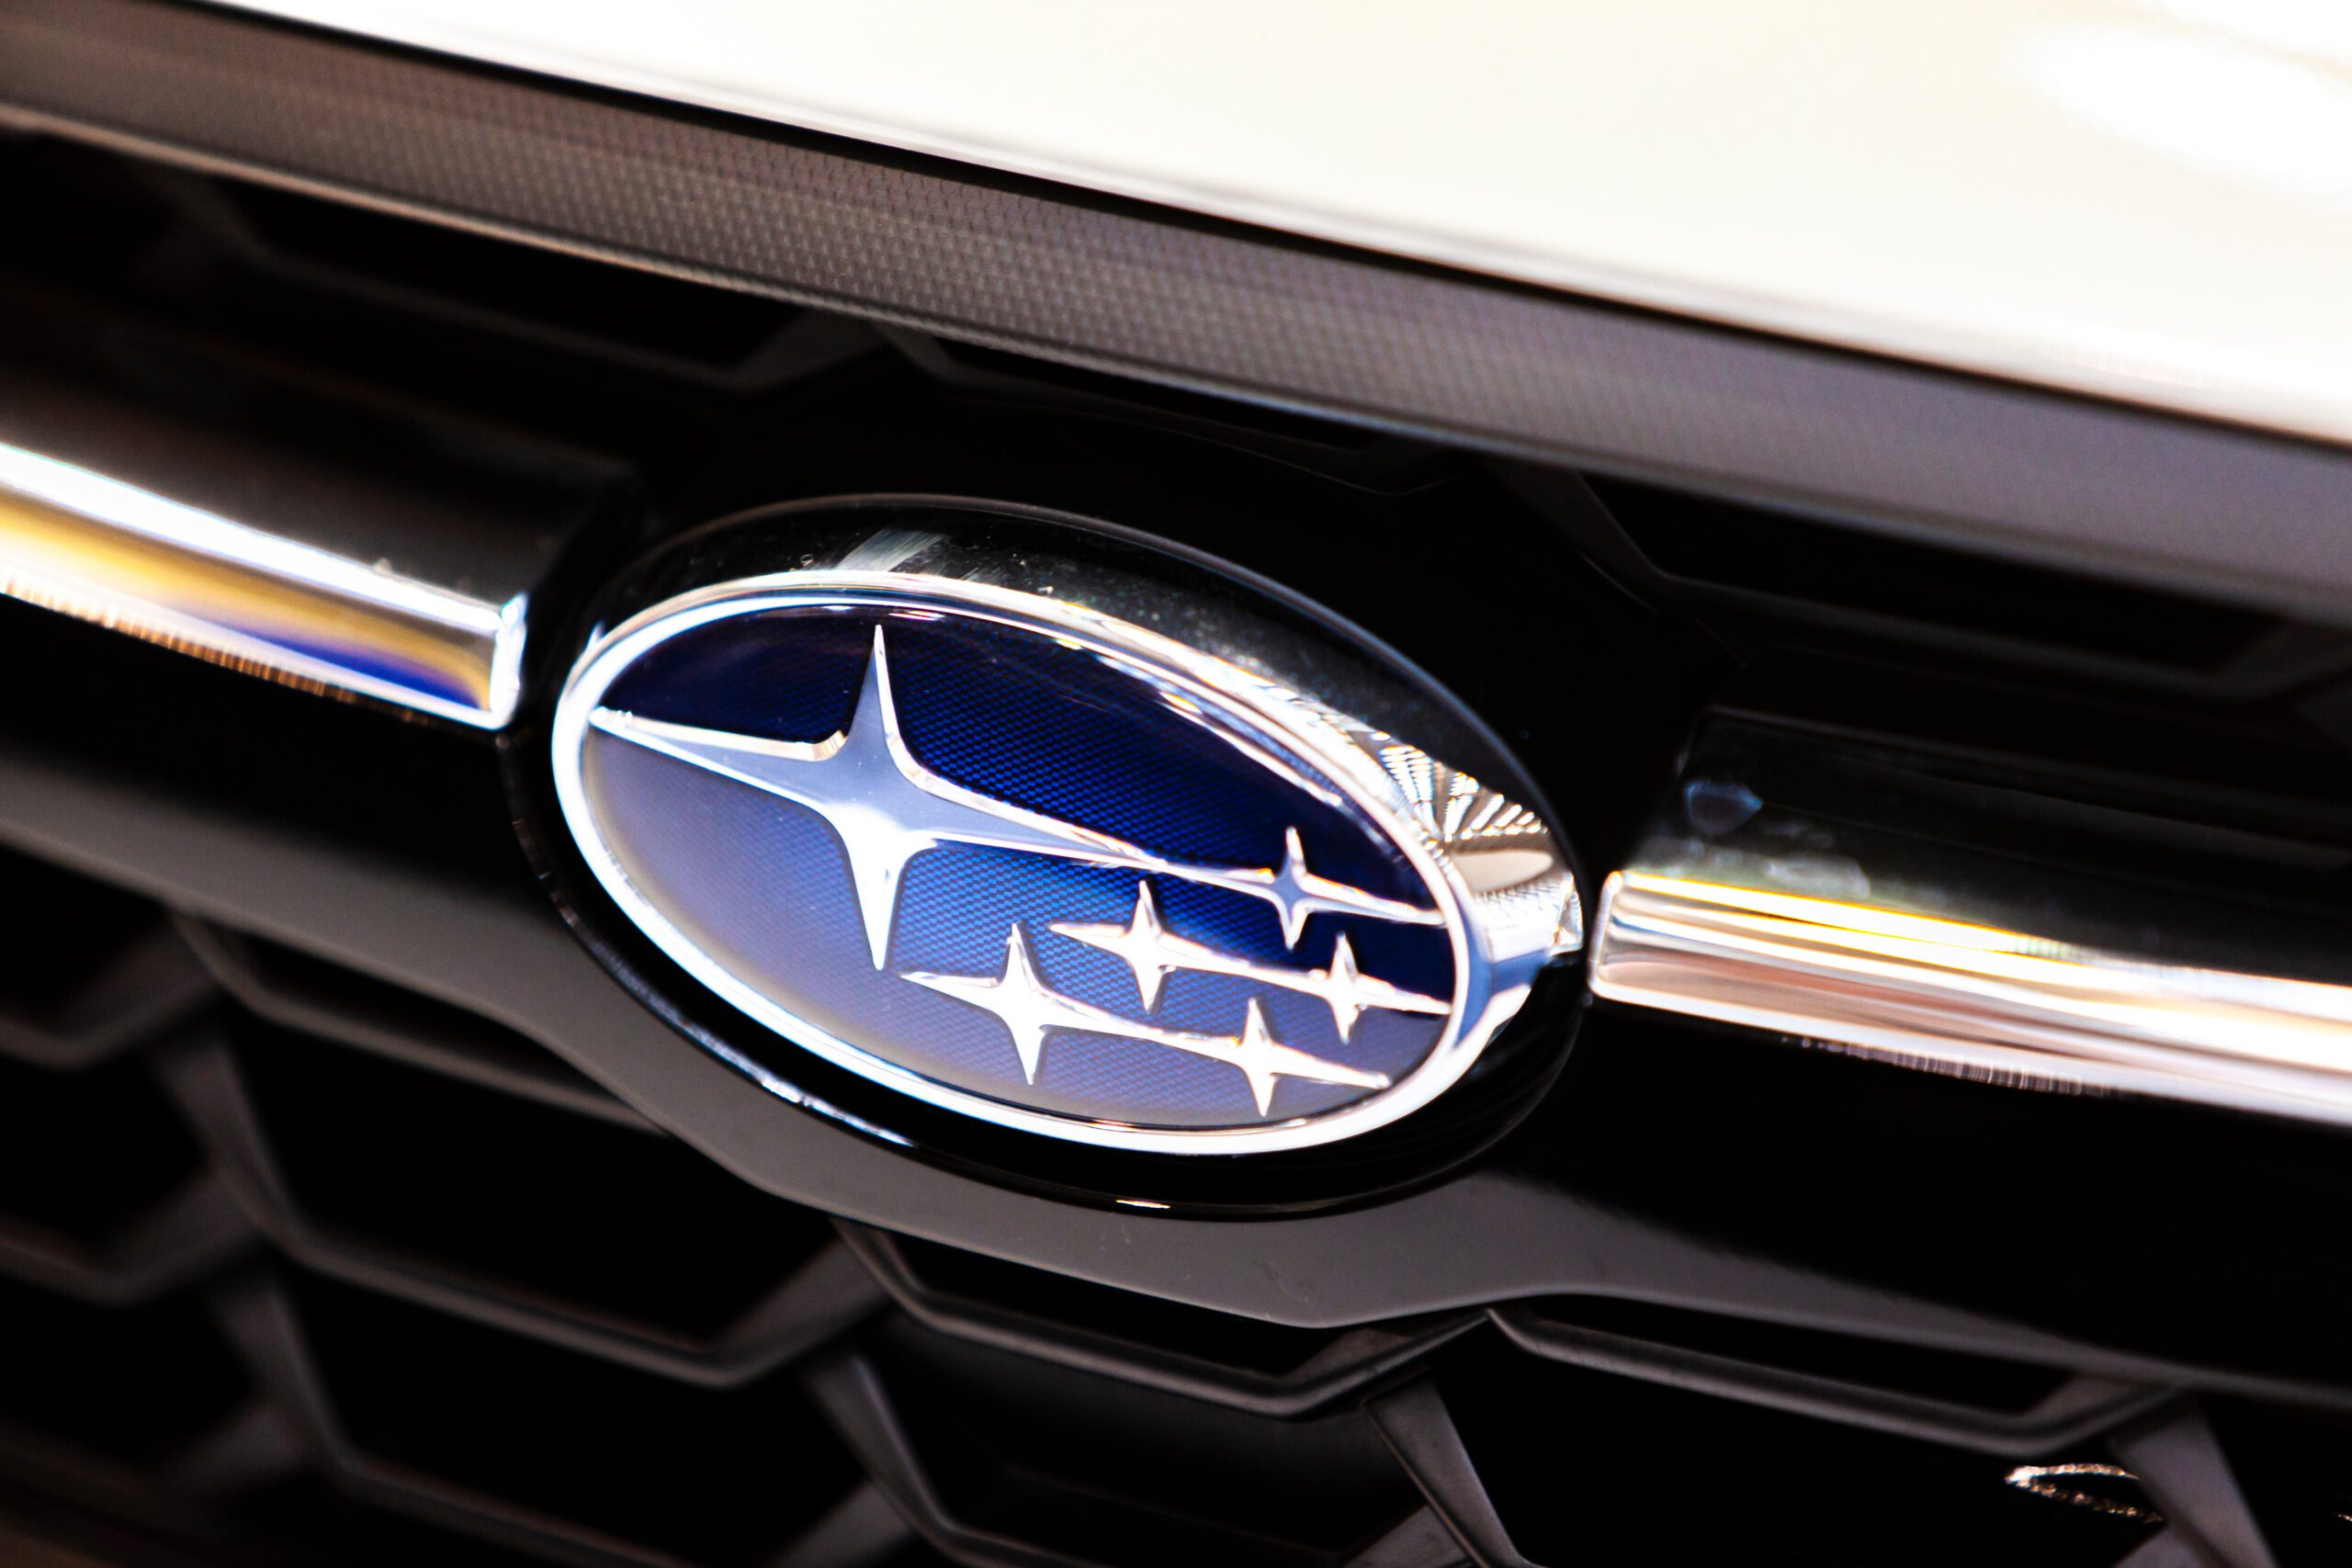 A proposed class action alleges a defect in the Starlink system has rendered the infotainment system in certain Subaru vehicles inoperable. 